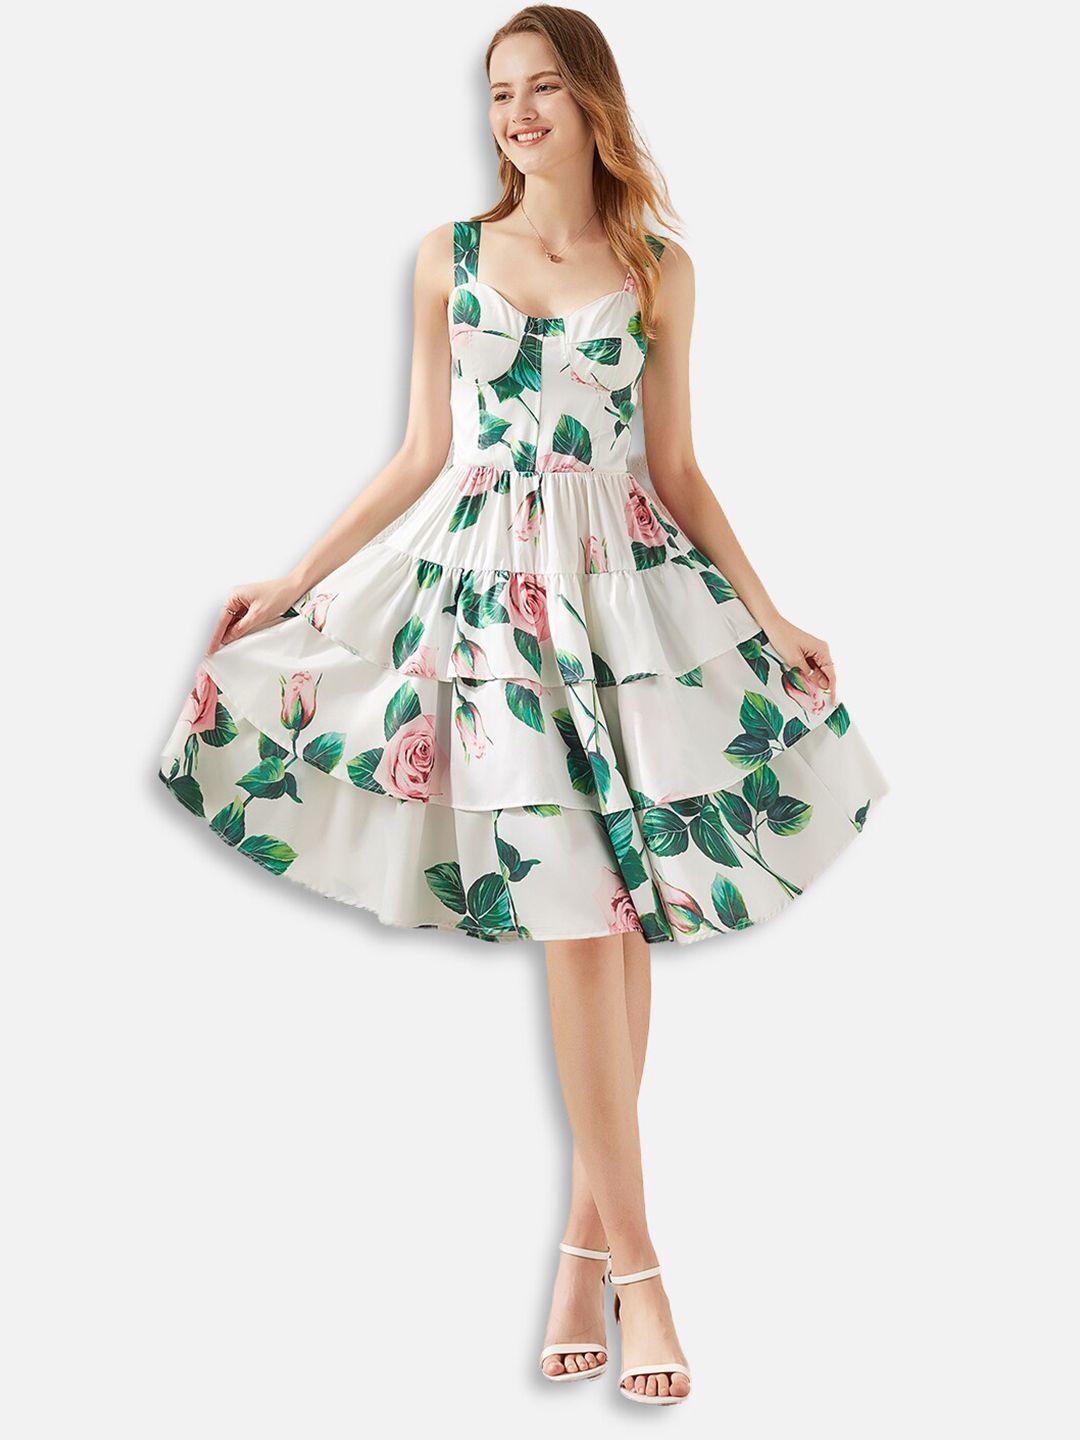 jc-collection-women-white-&-green-tropical-layered-dress